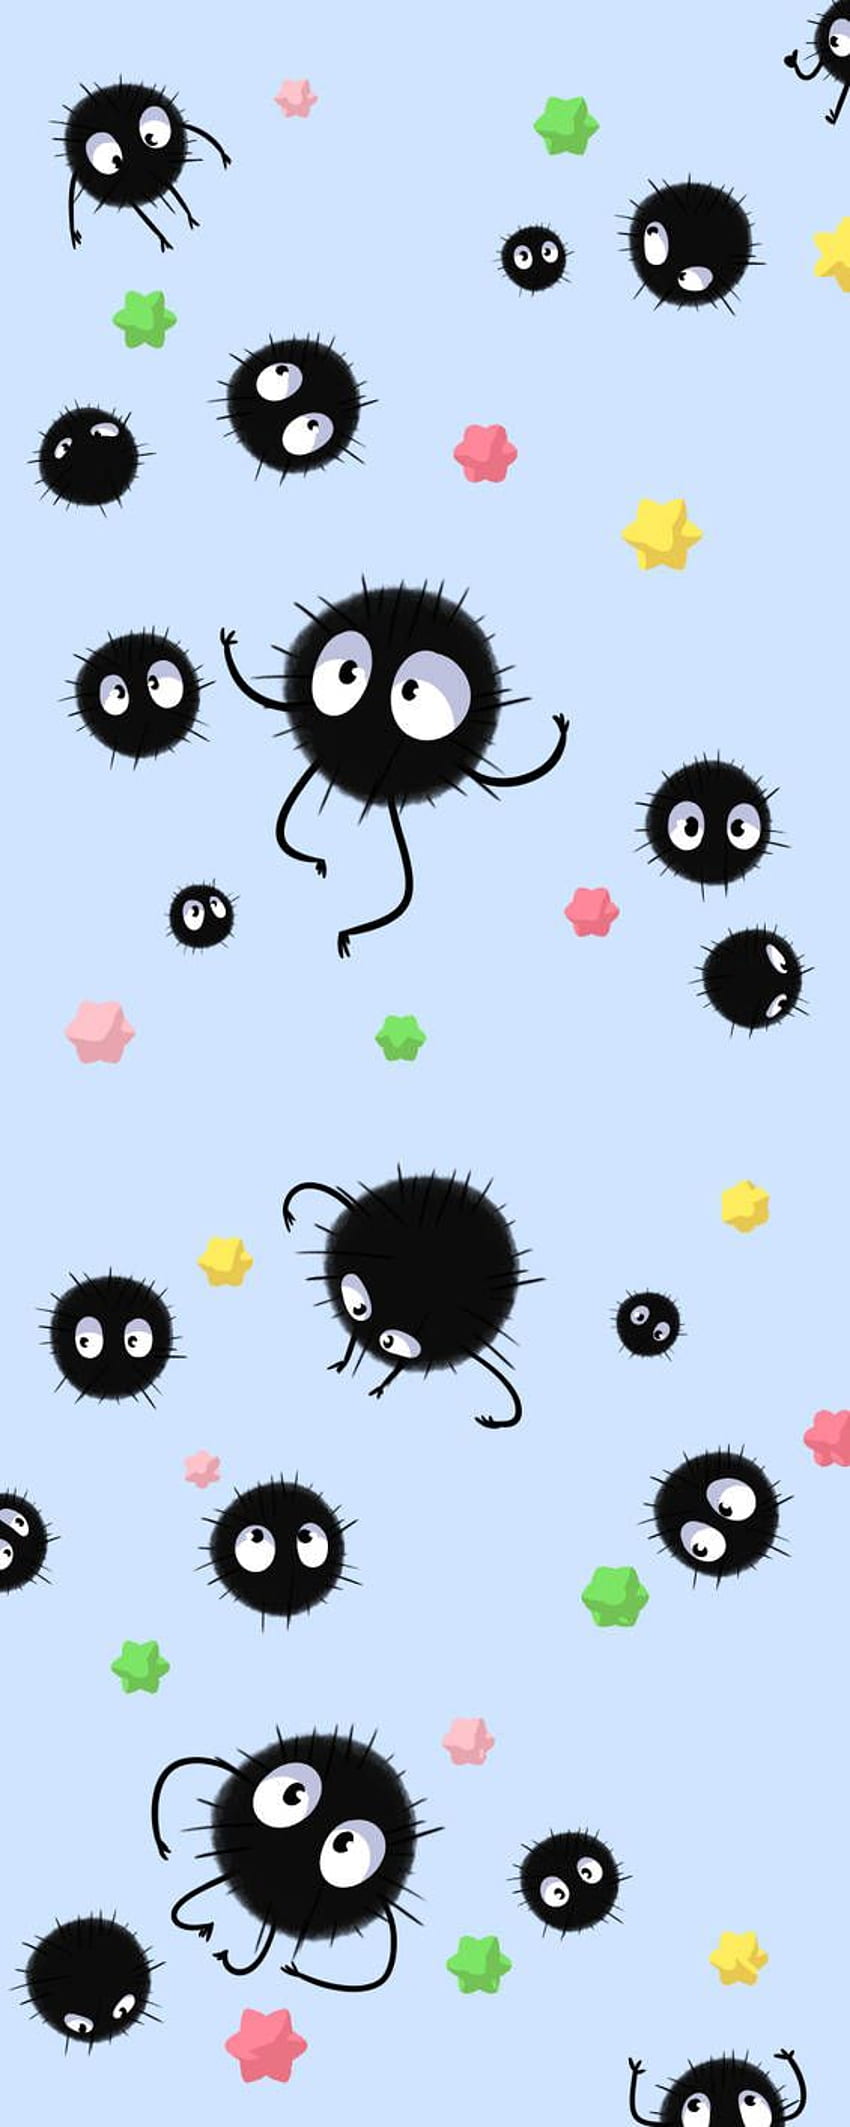 Soot Sprite Background (F2U!) by DominickLuhr. Soot sprites, Spirited away soot sprites, Totoro soot sprites HD phone wallpaper